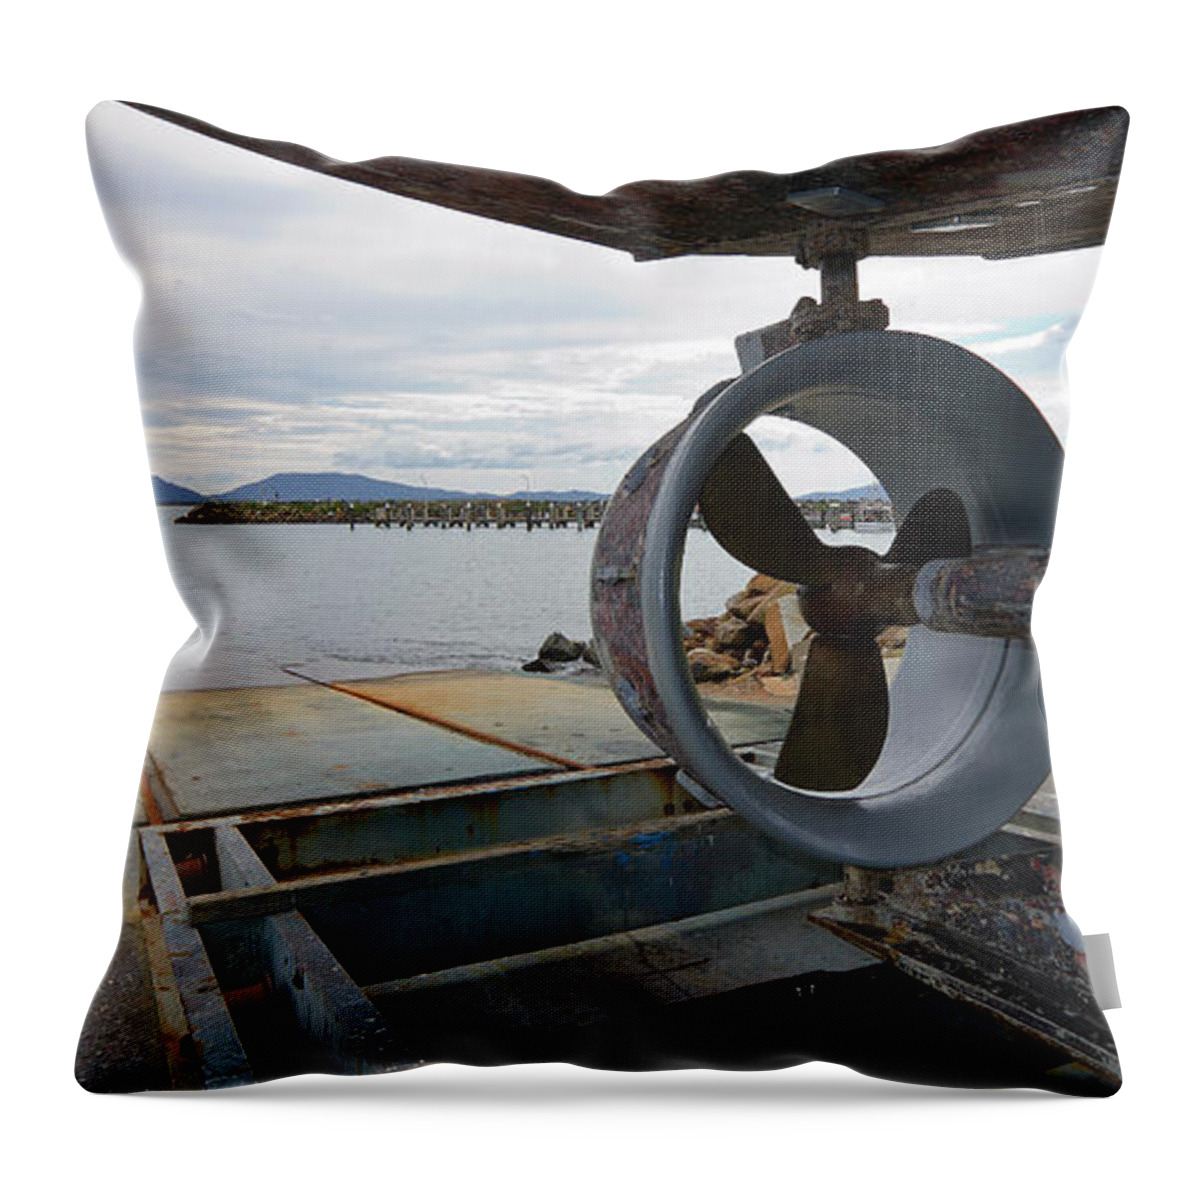 Crowdy Head Slipway Throw Pillow featuring the digital art Crowdy Head Slipway 79203 by Kevin Chippindall